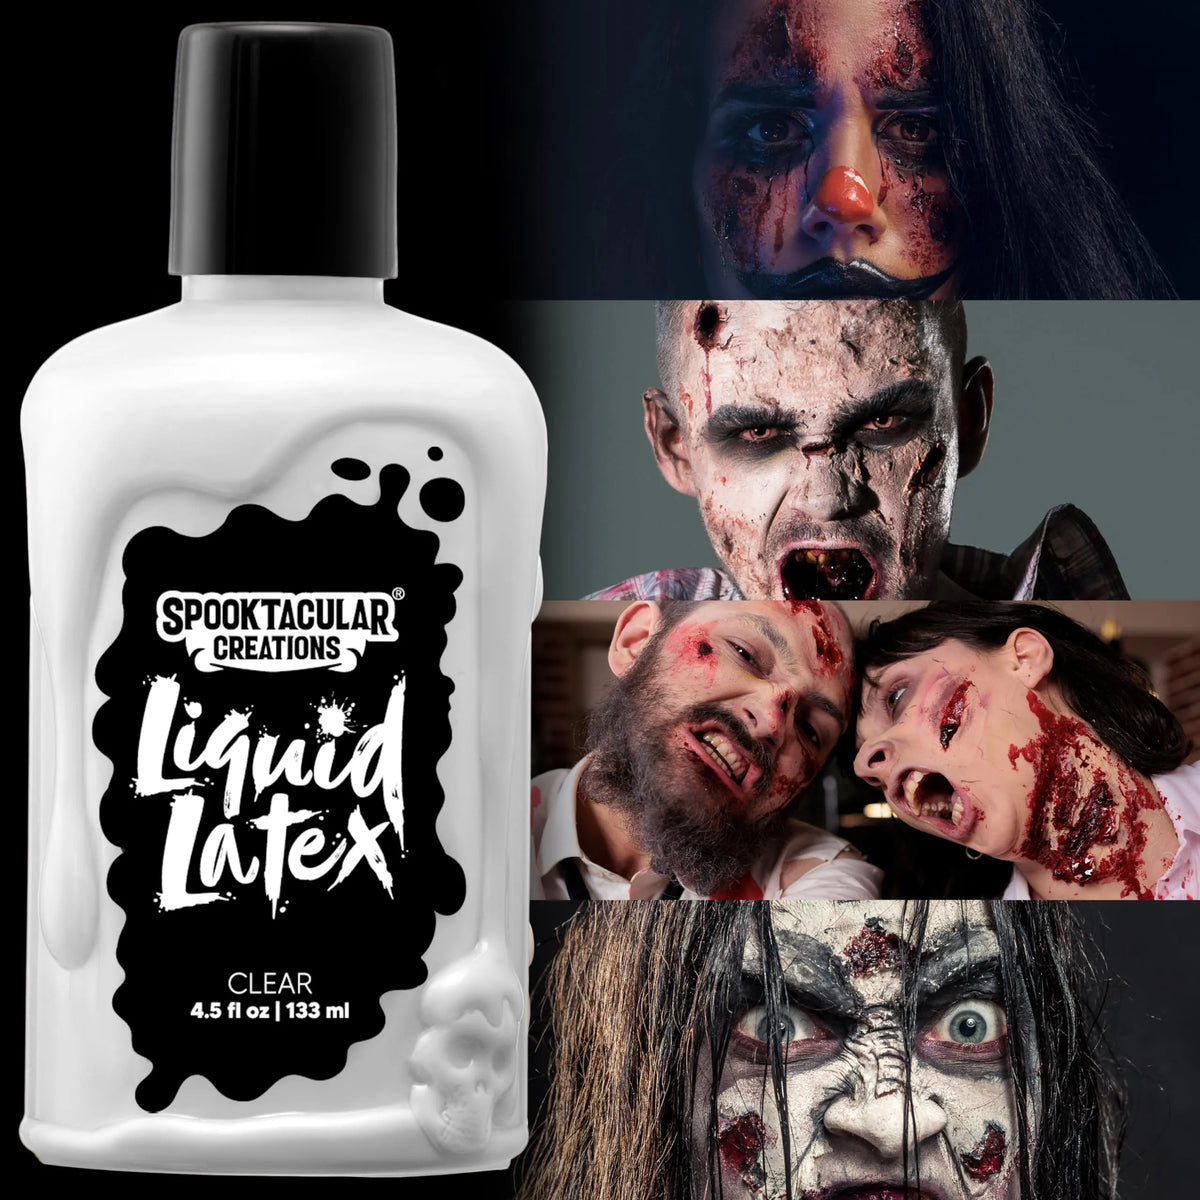 1 Oz Halloween White Makeup Liquid Latex for Adult and Kids-White